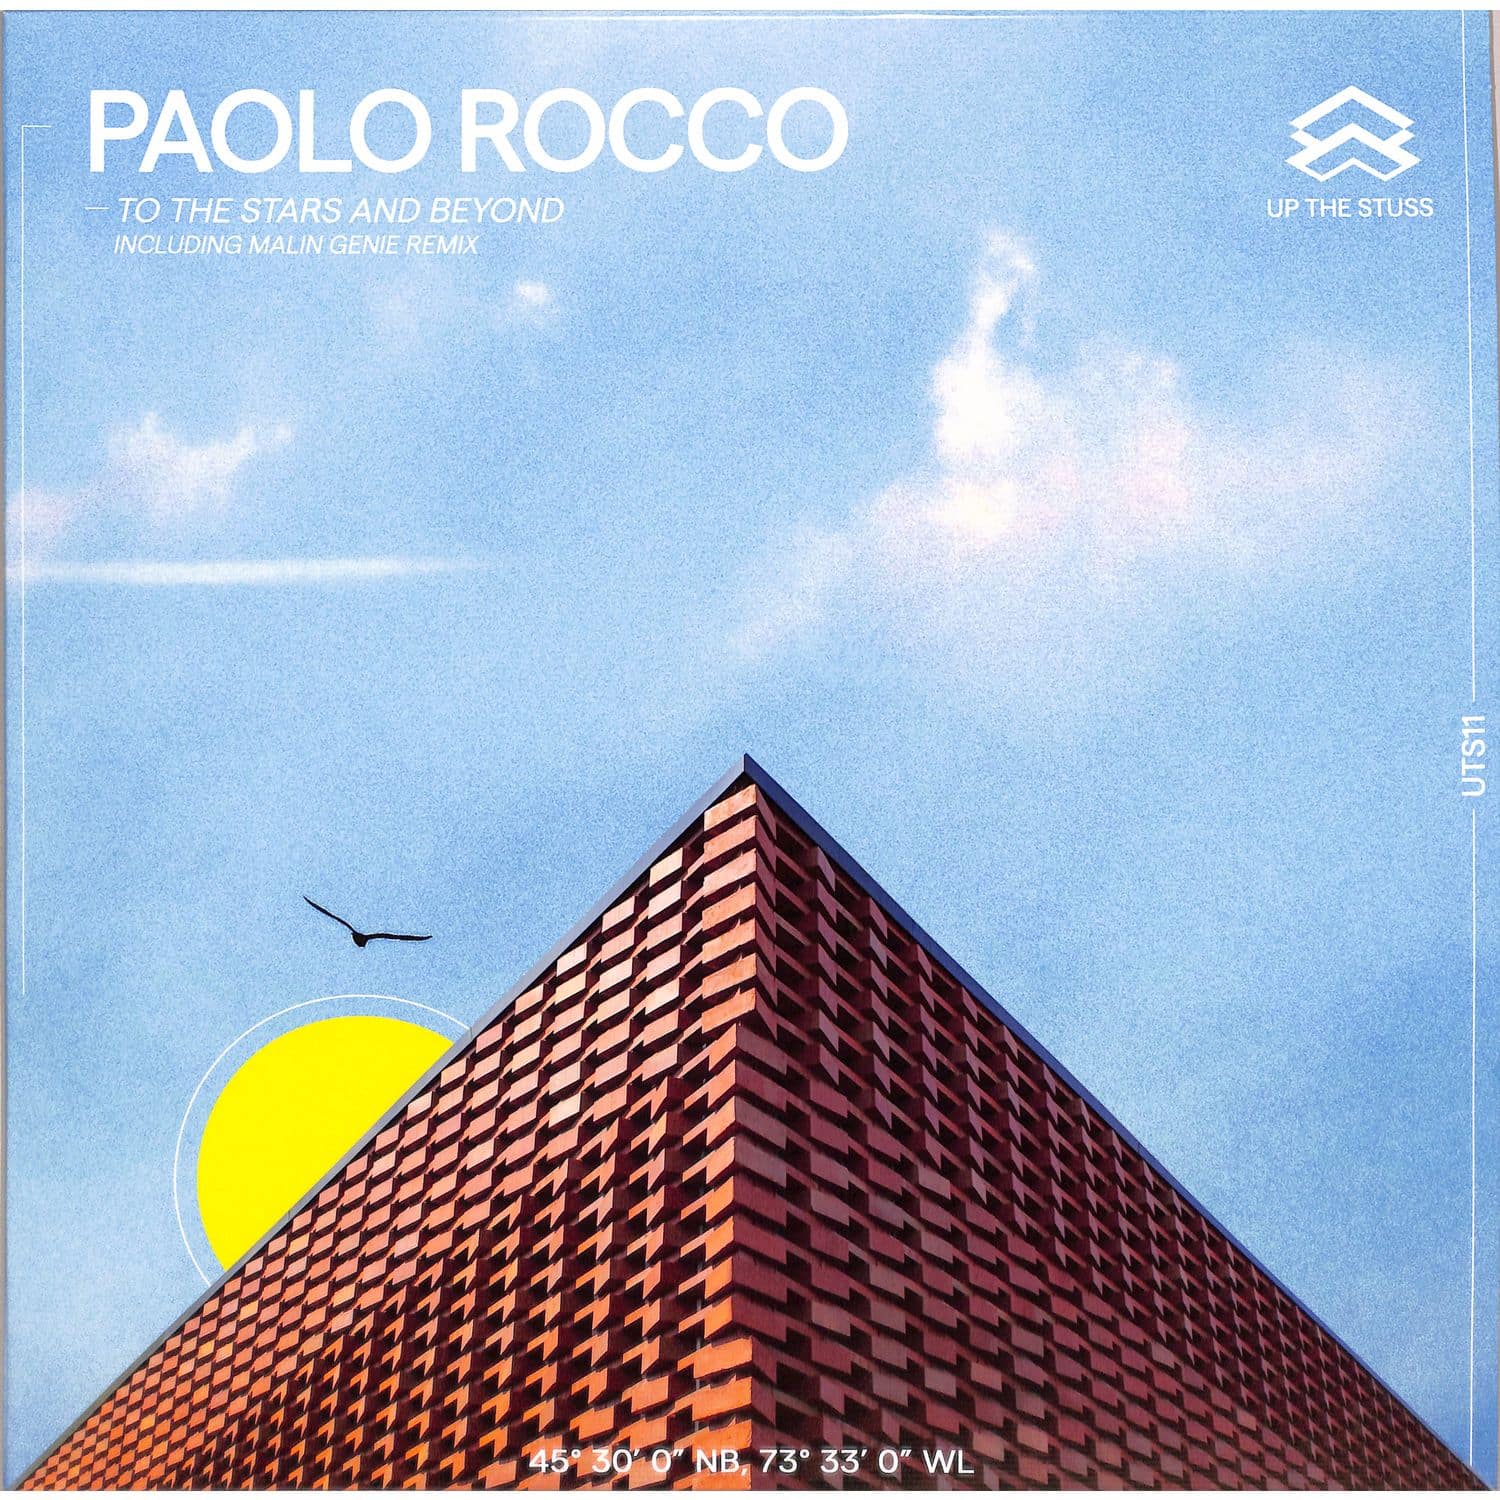 Paolo Rocco - TO THE STARS AND BEYOND 